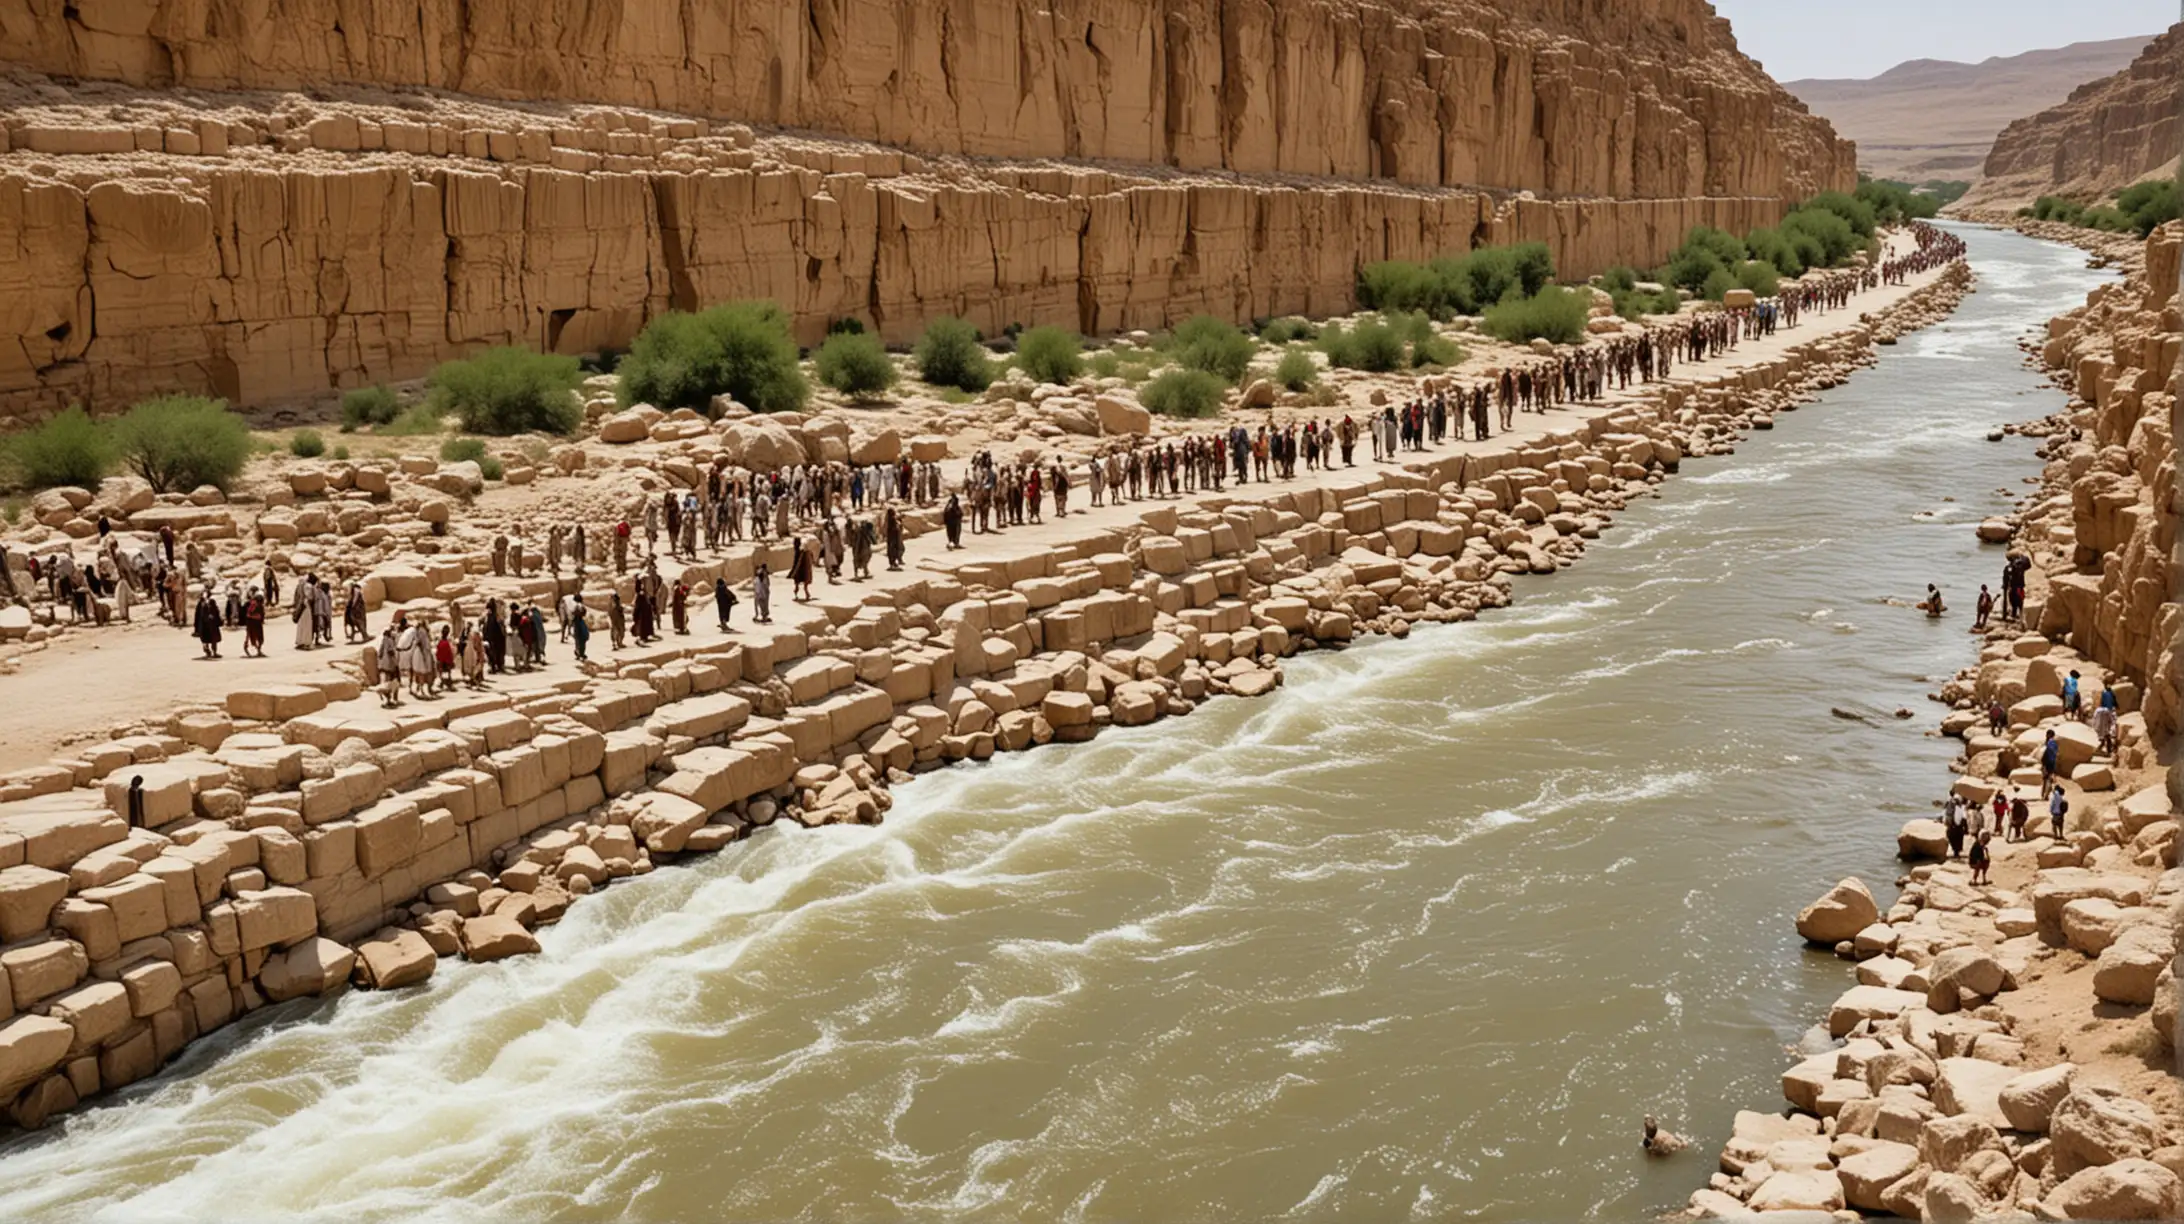 A group of people being led by the Biblical Joshua crossing the River Jordan, where the water is standing up like a wall on the left, and a wall on the right.  Set during the Biblical era of Moses, in the Middle East.